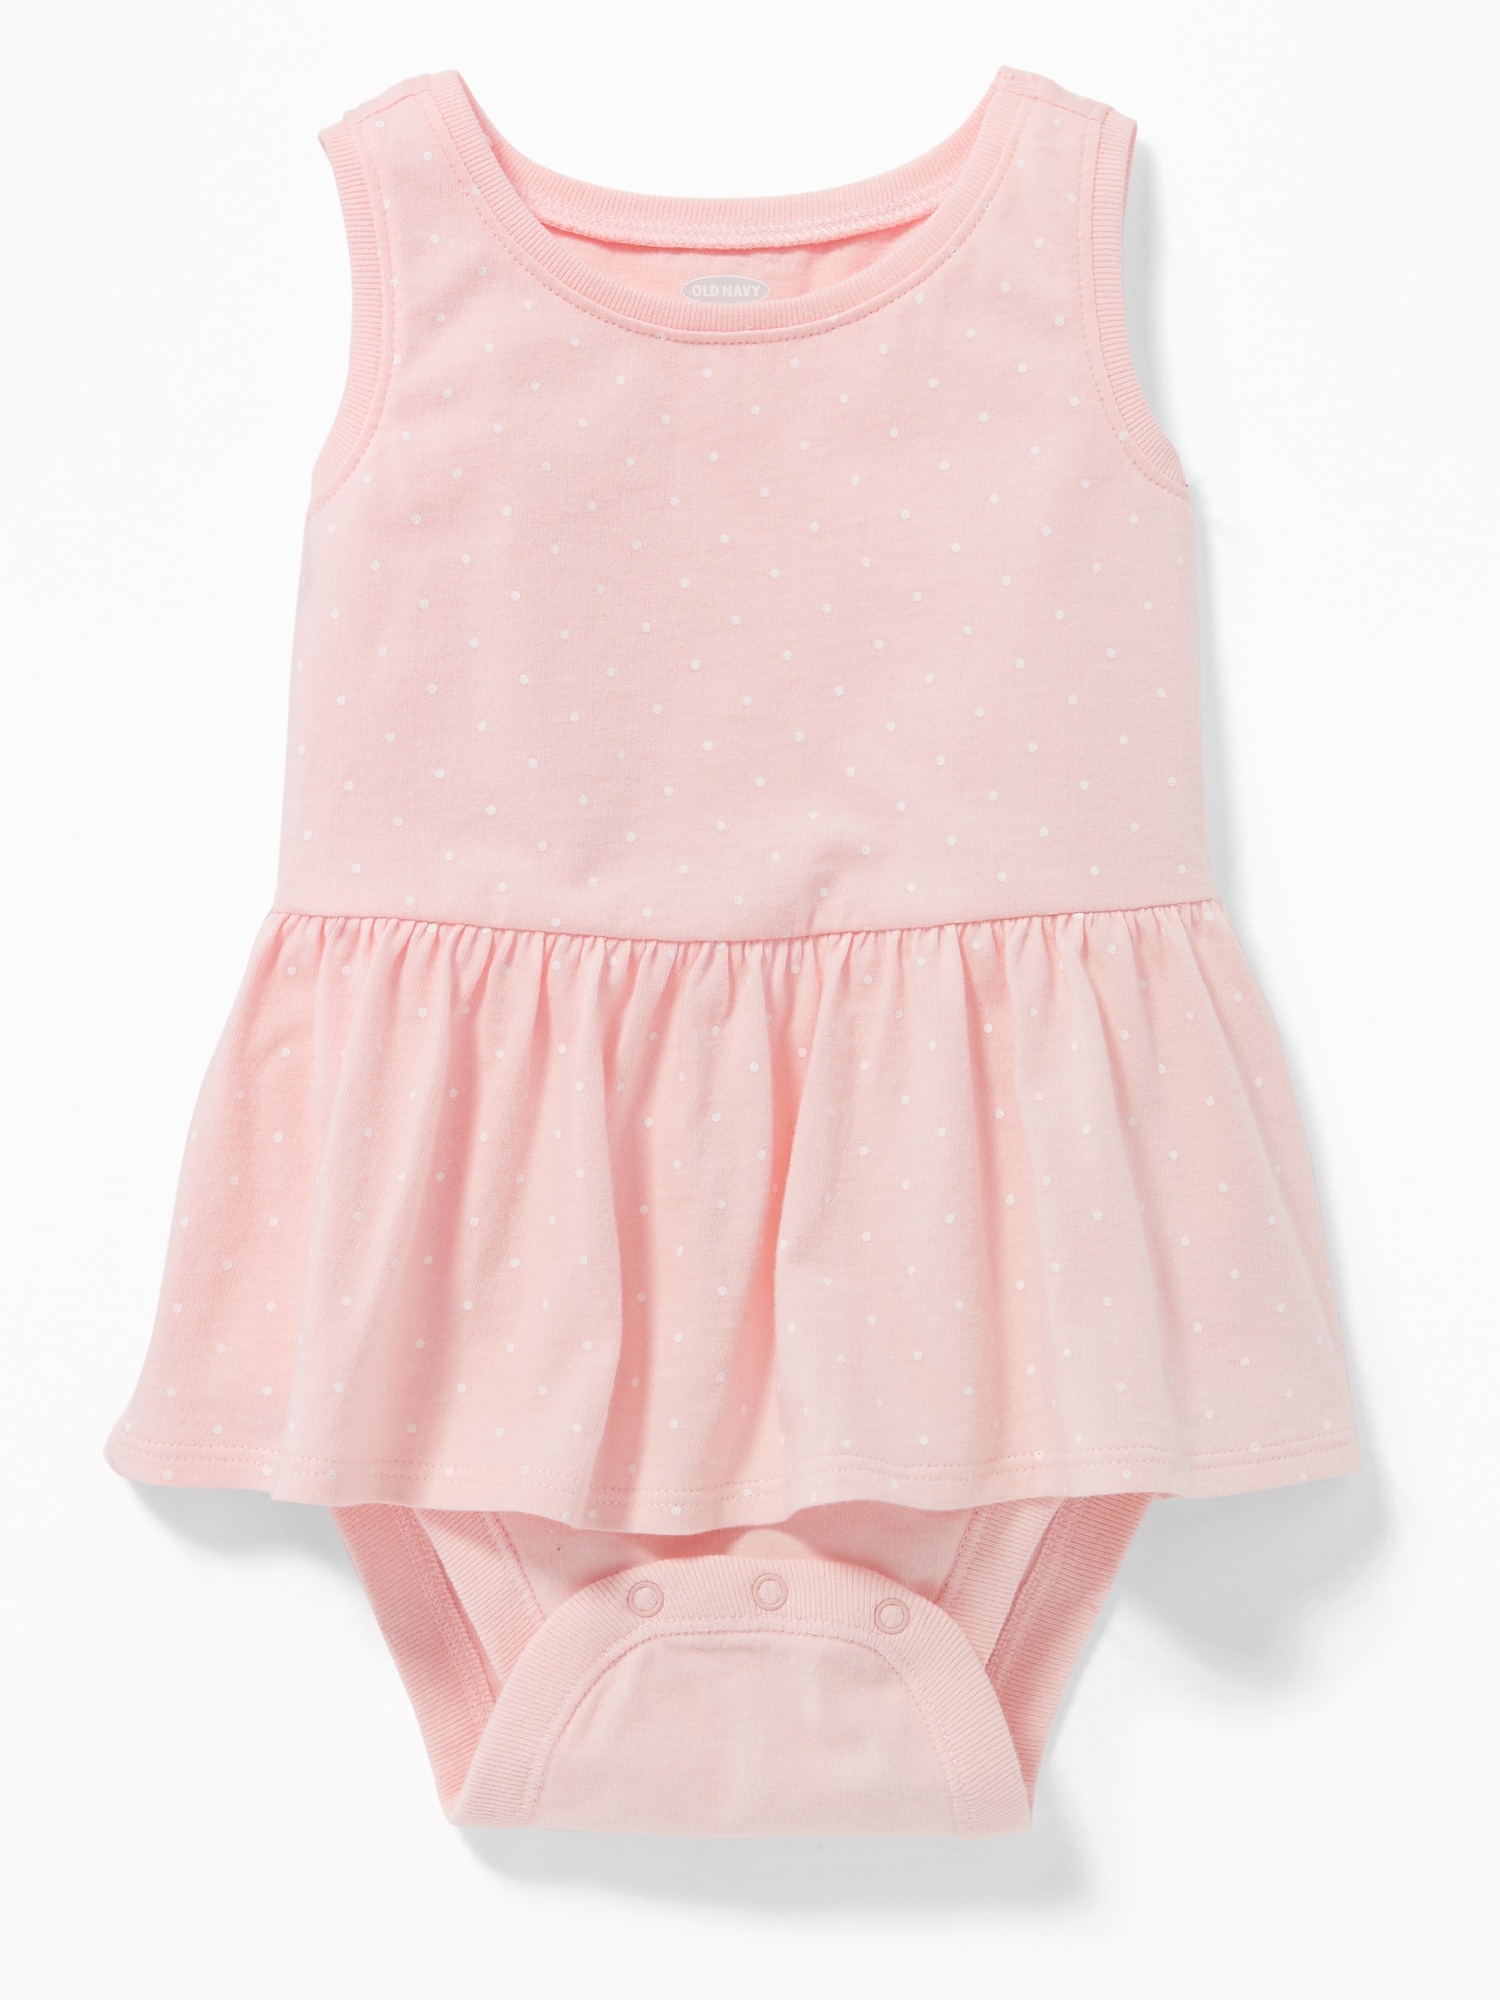 Printed 2-in-1 Peplum Bodysuit for Baby | Old Navy